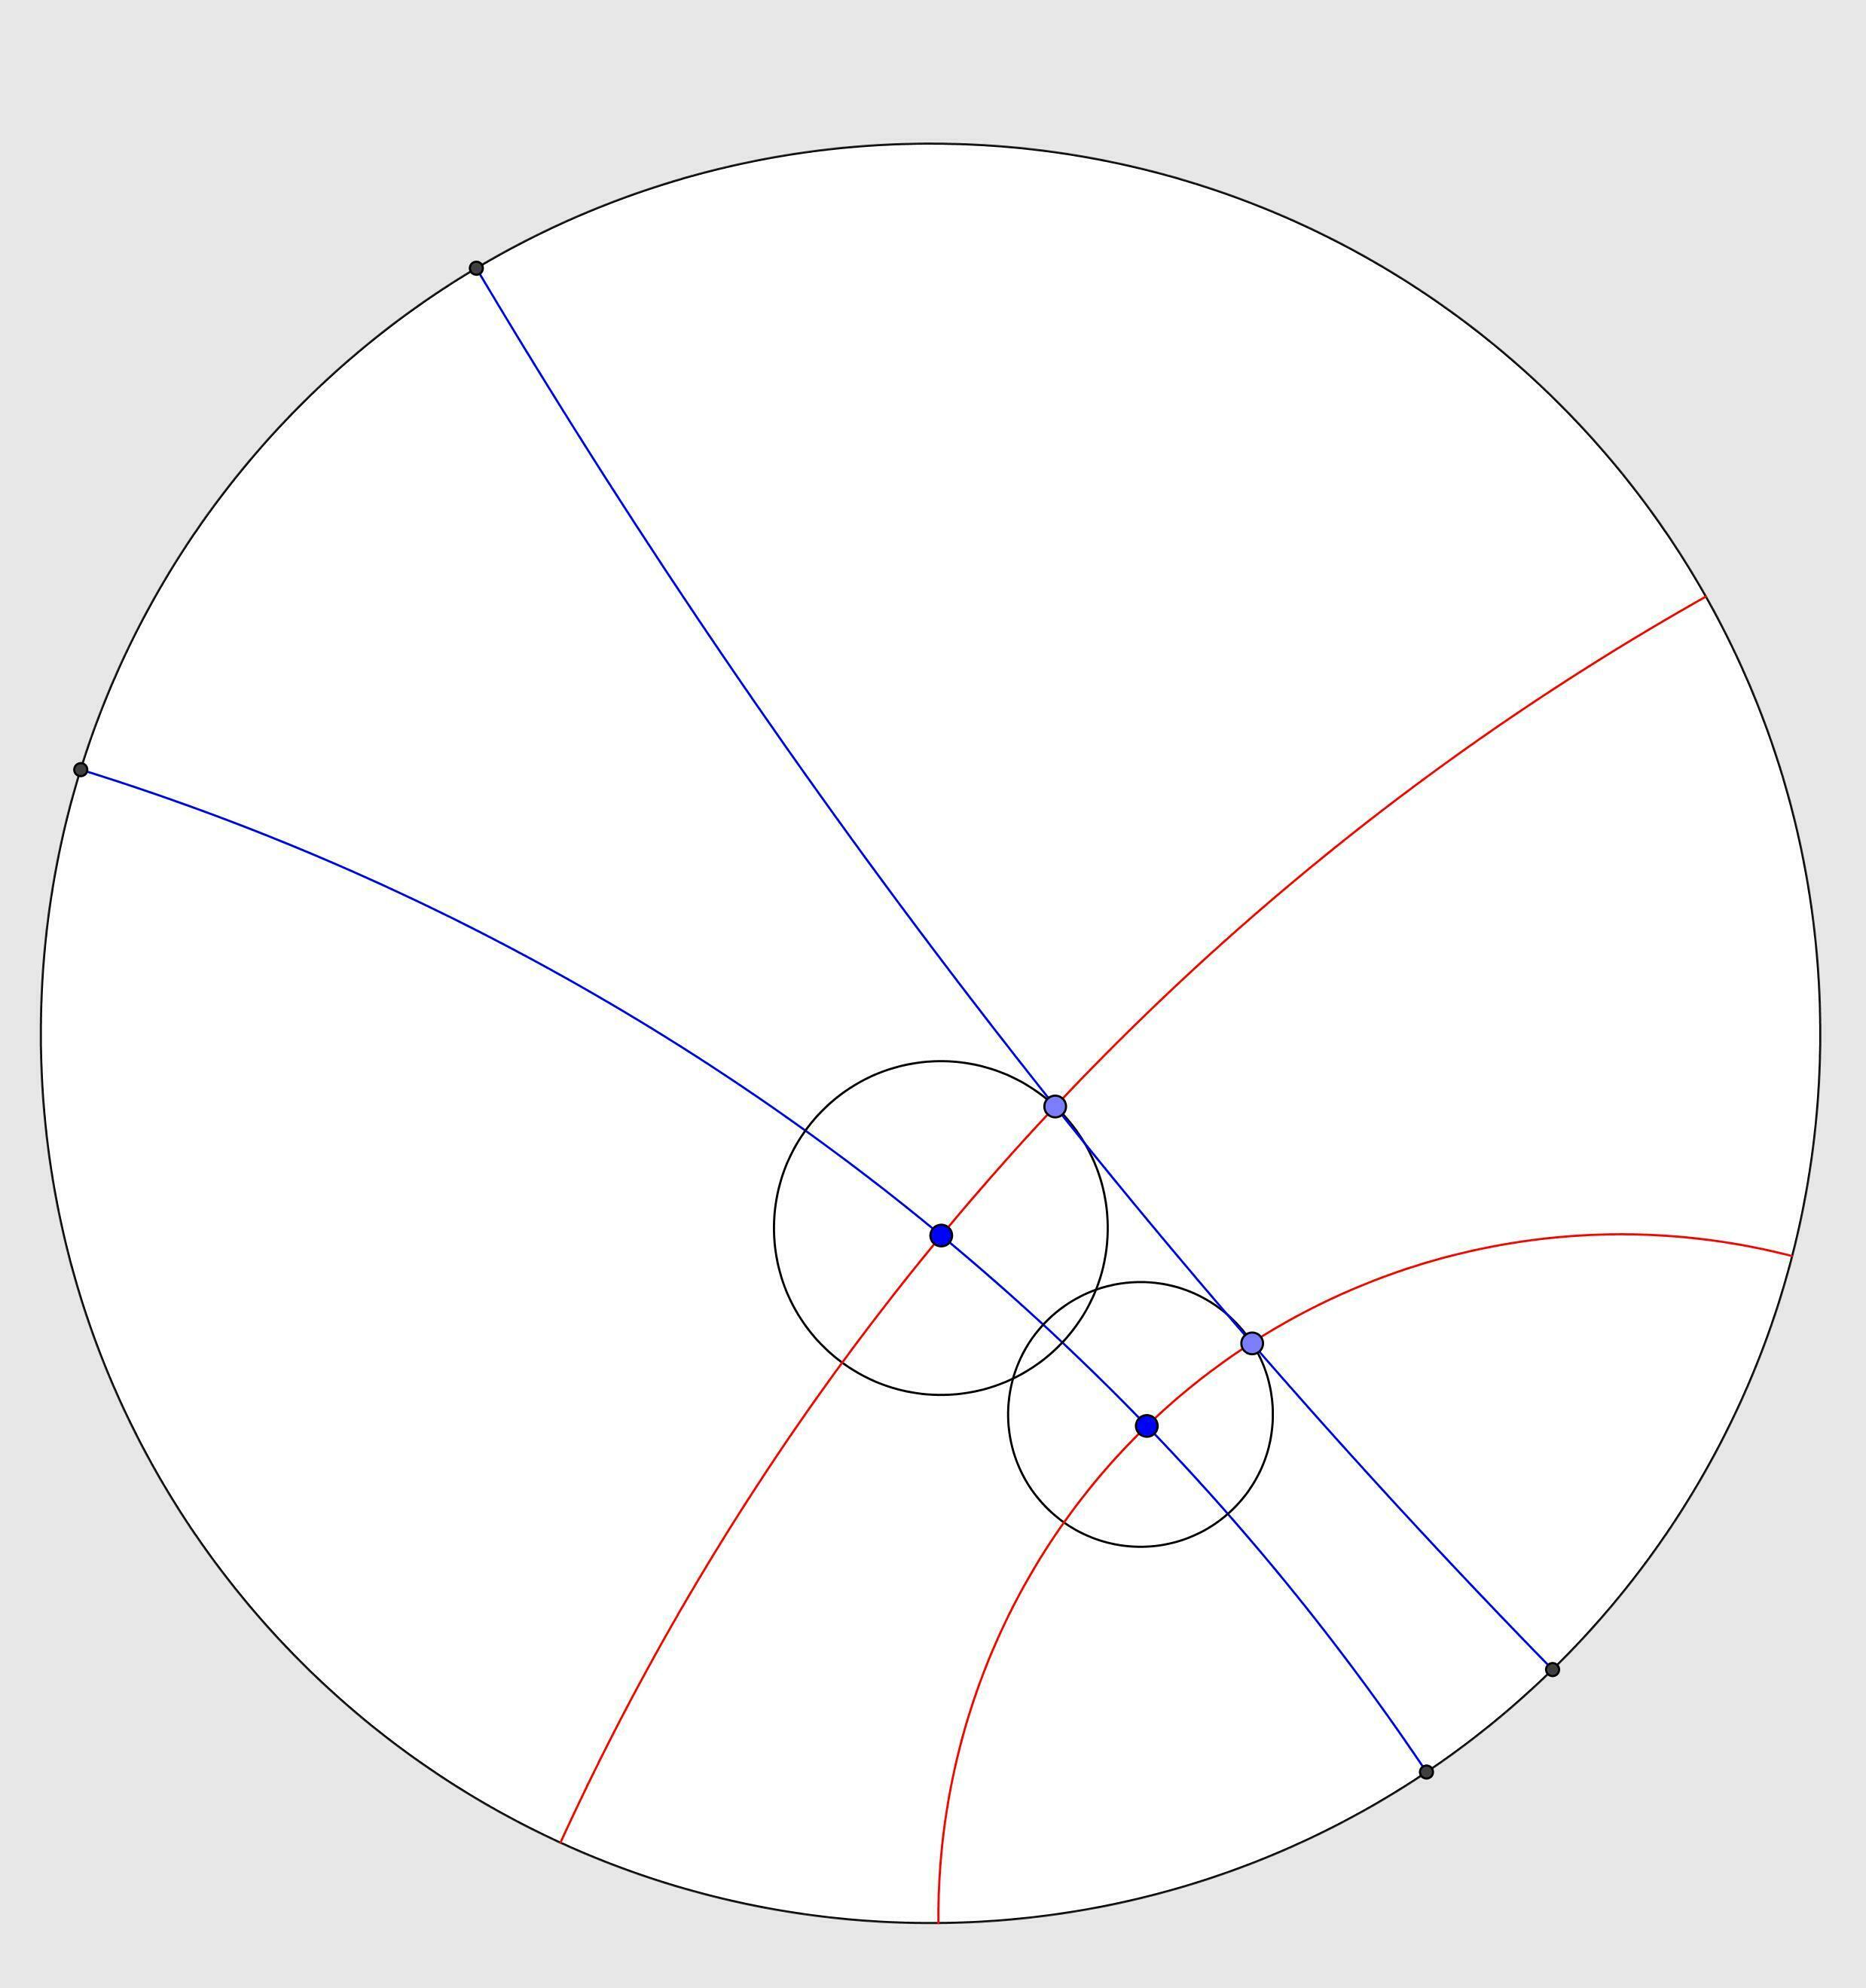 Parallel lines in hyperbolic space